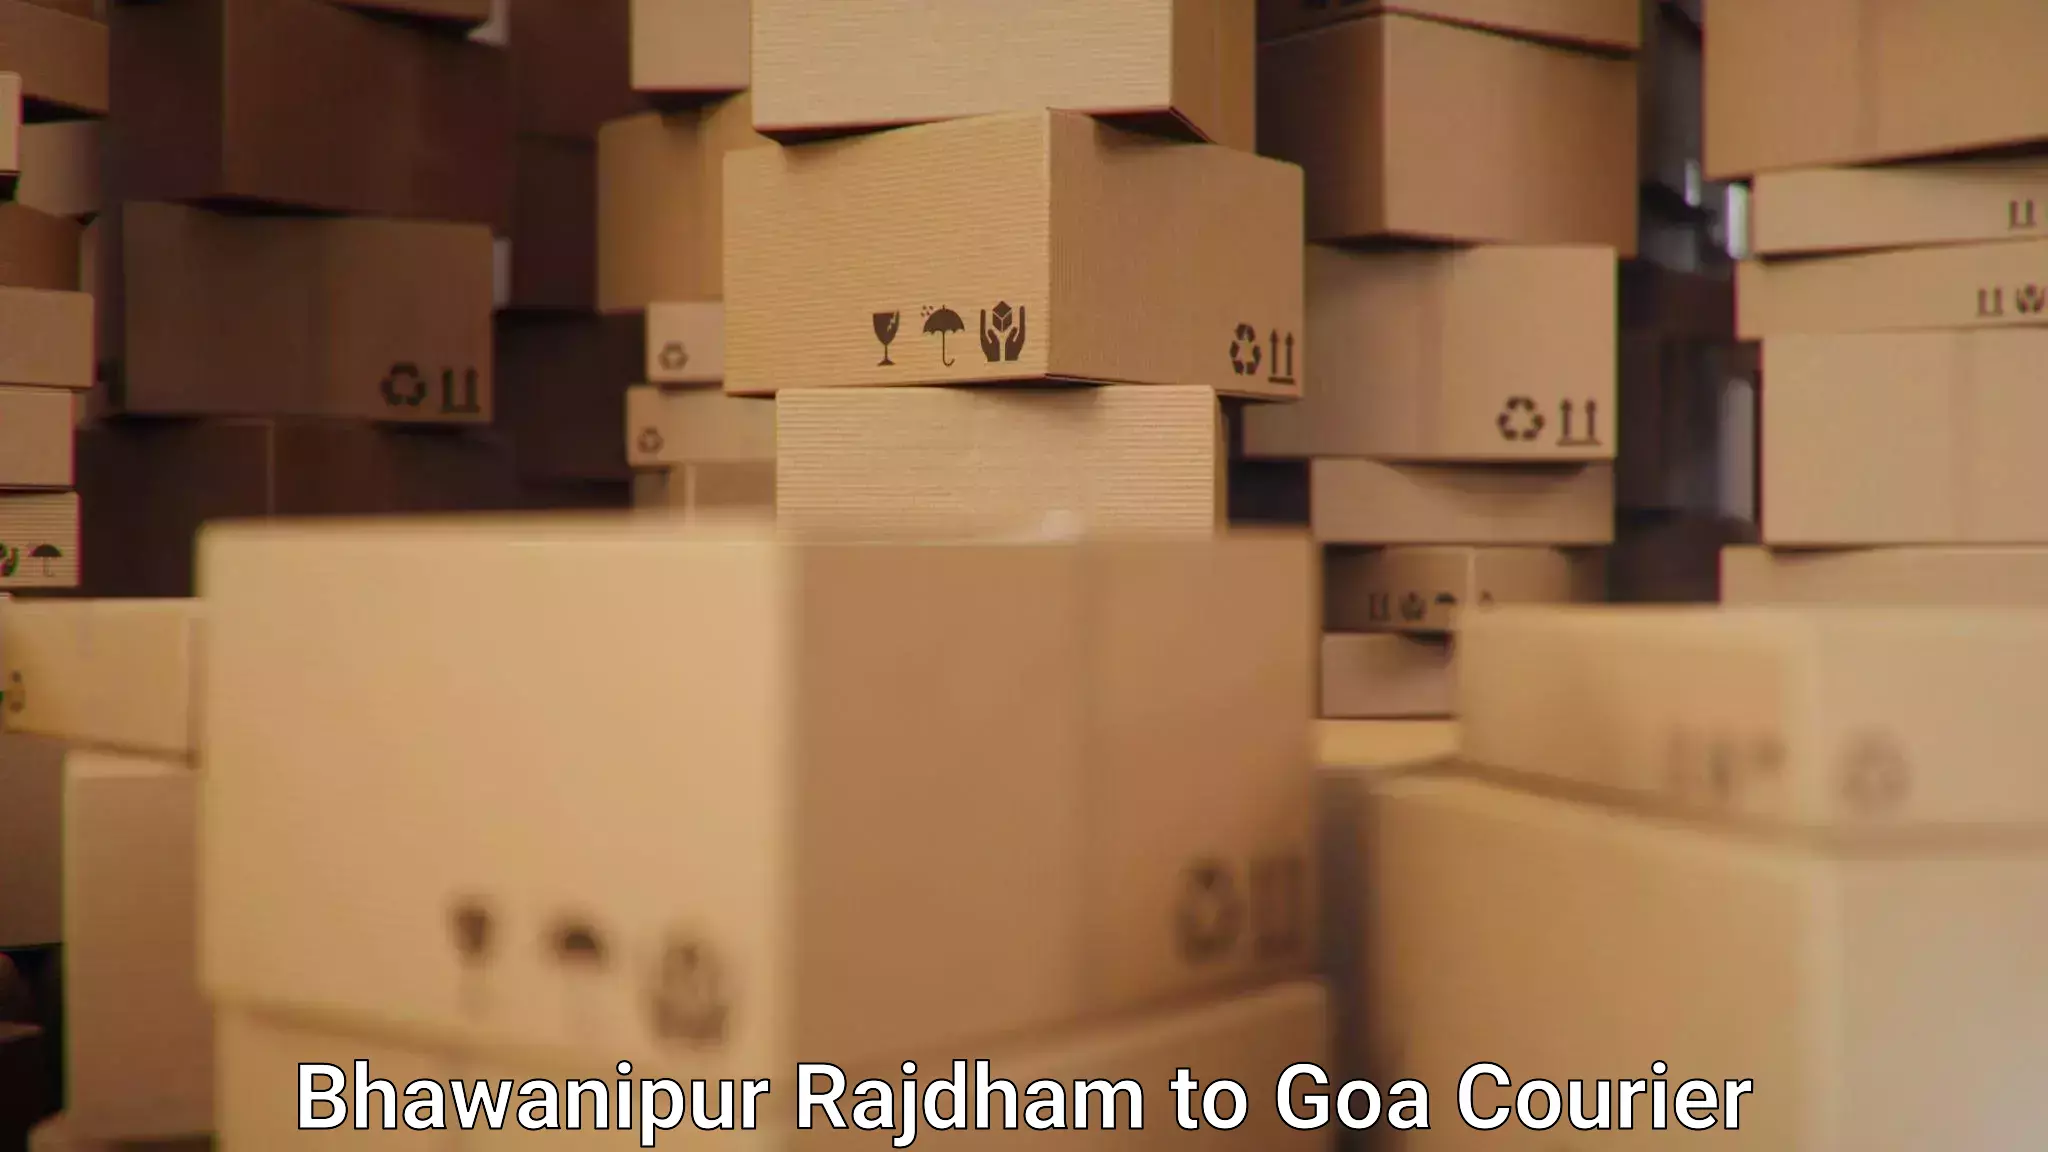 Flexible delivery schedules Bhawanipur Rajdham to South Goa